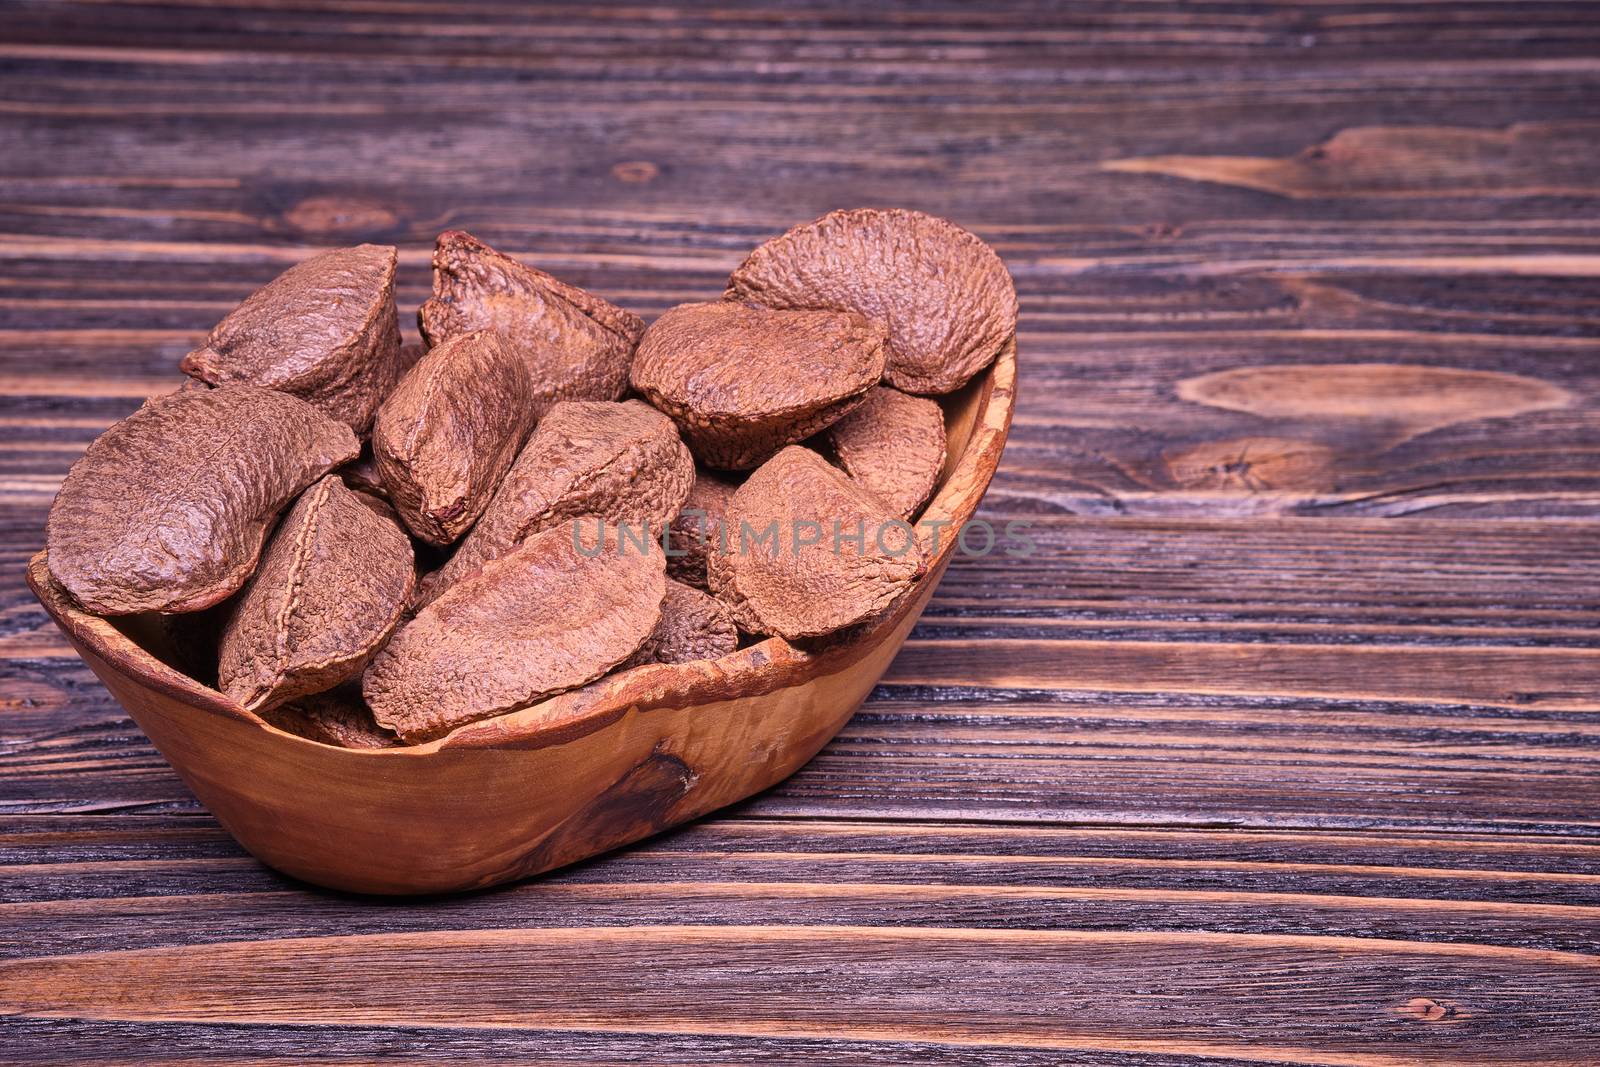 Paranuts in an olive wood cup, vegetarian food in wooden bowls, on old wooden background.